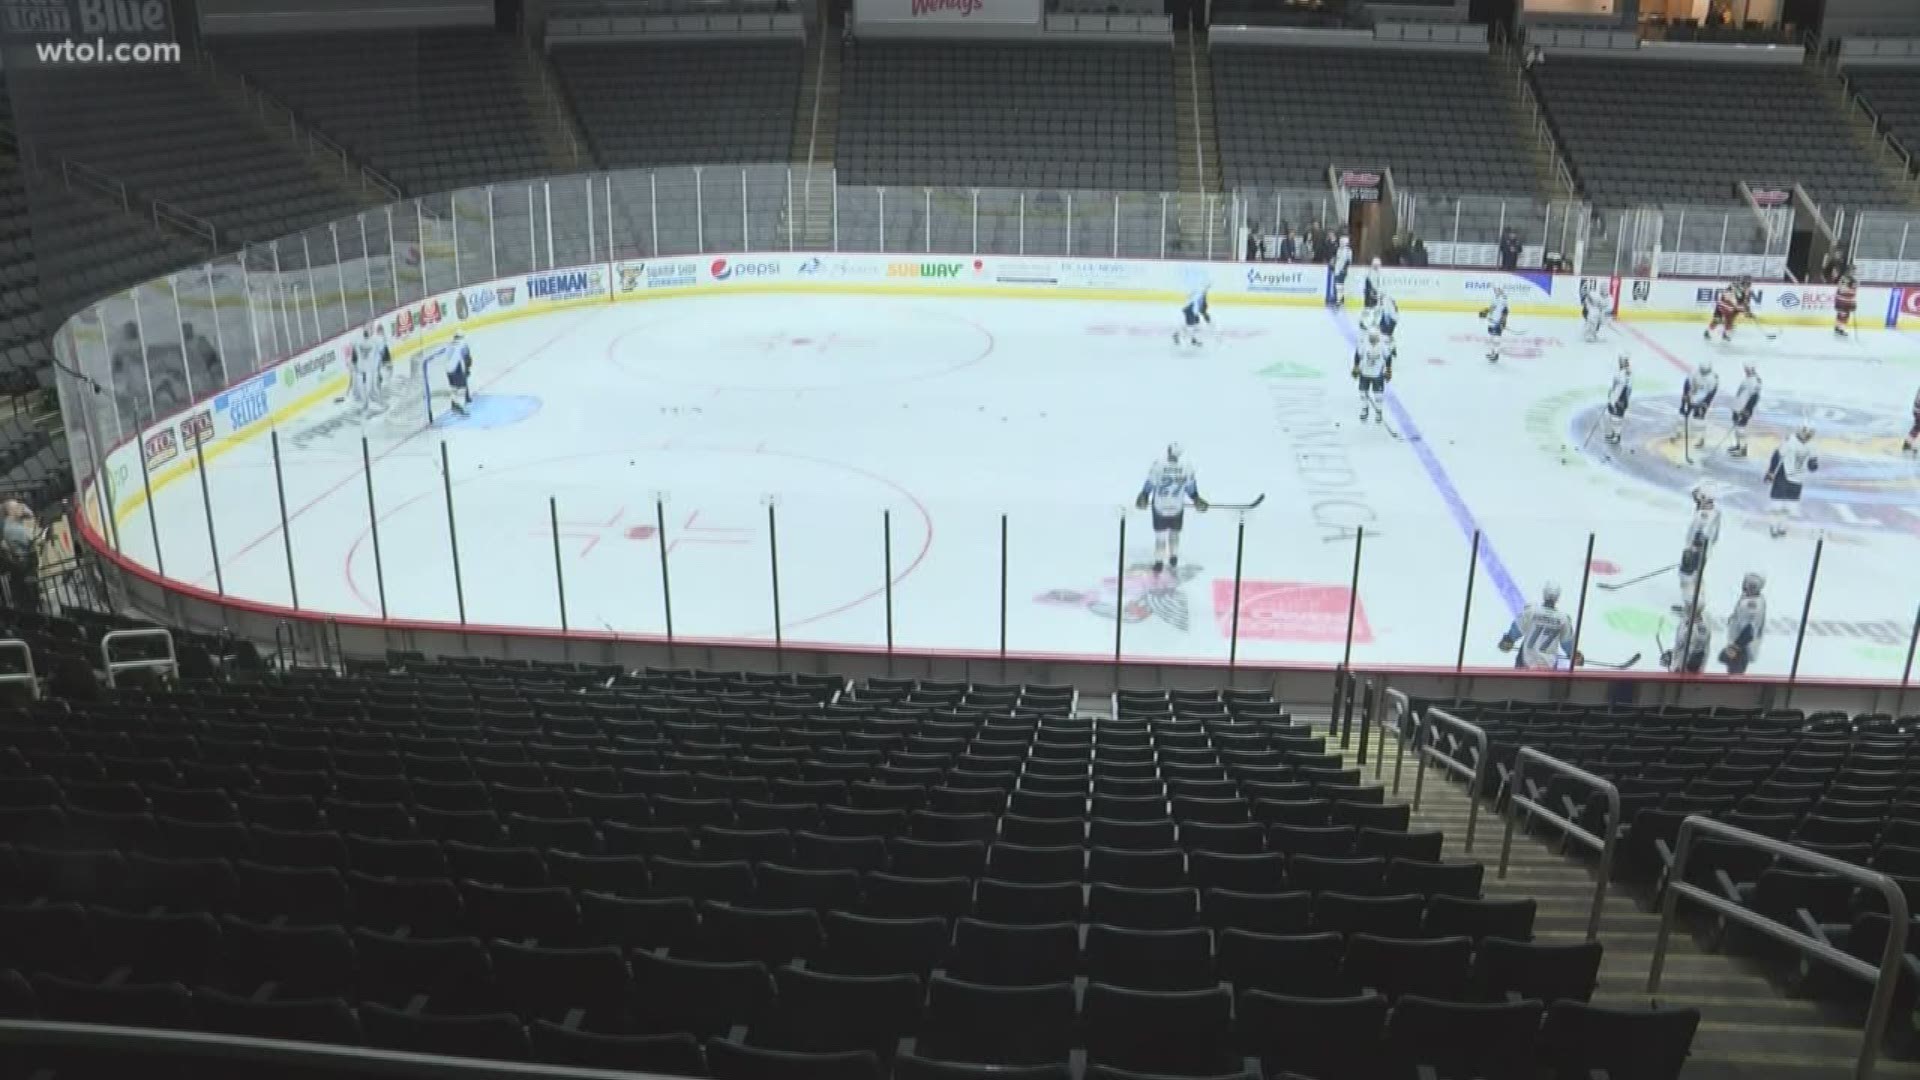 With just hours left before the game, the Walleye announced they would not be allowing the public into the Huntington Center.